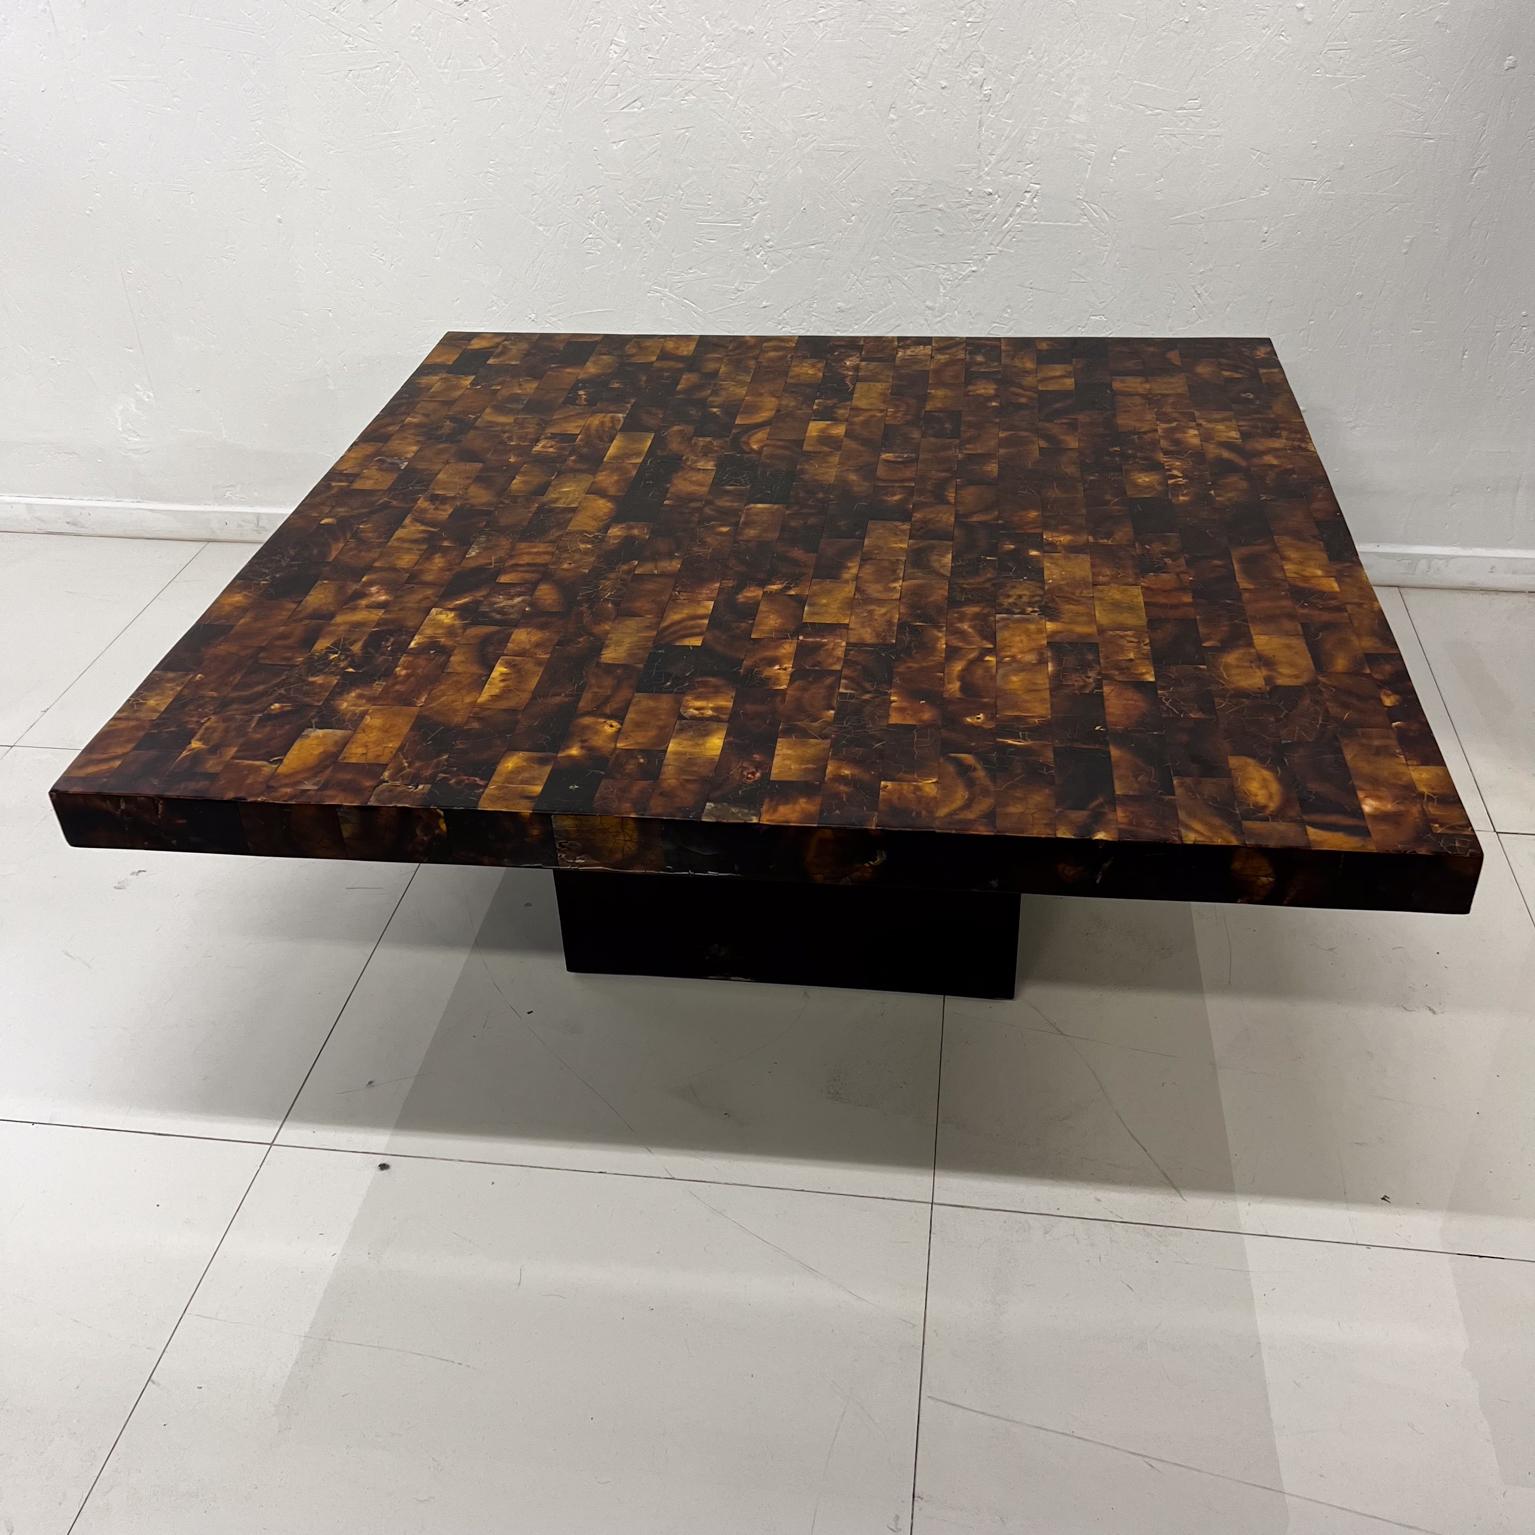 1970s Modern Burlwood Marquetry Coffee Table
Plywood base
Style of Sandro Petti Italy
Unmarked
40.13 x 40.13 x 16.75
Preowned original vintage condition. Unrestored.
Refer to all images provided.